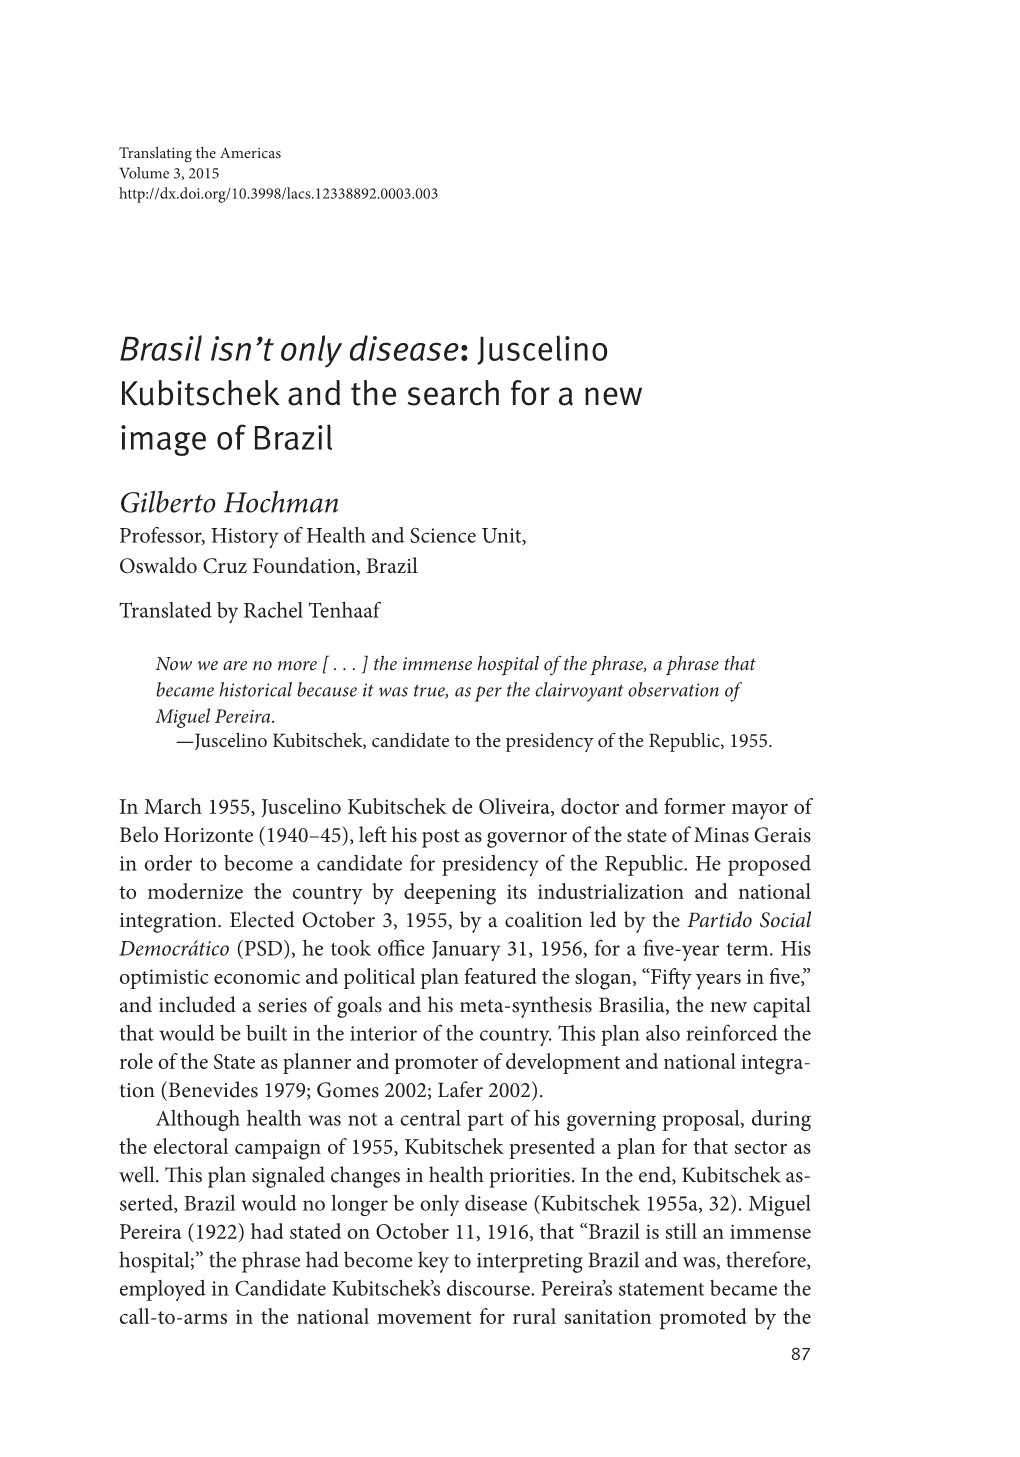 Brasil Isn't Only Disease: Juscelino Kubitschek and the Search for A